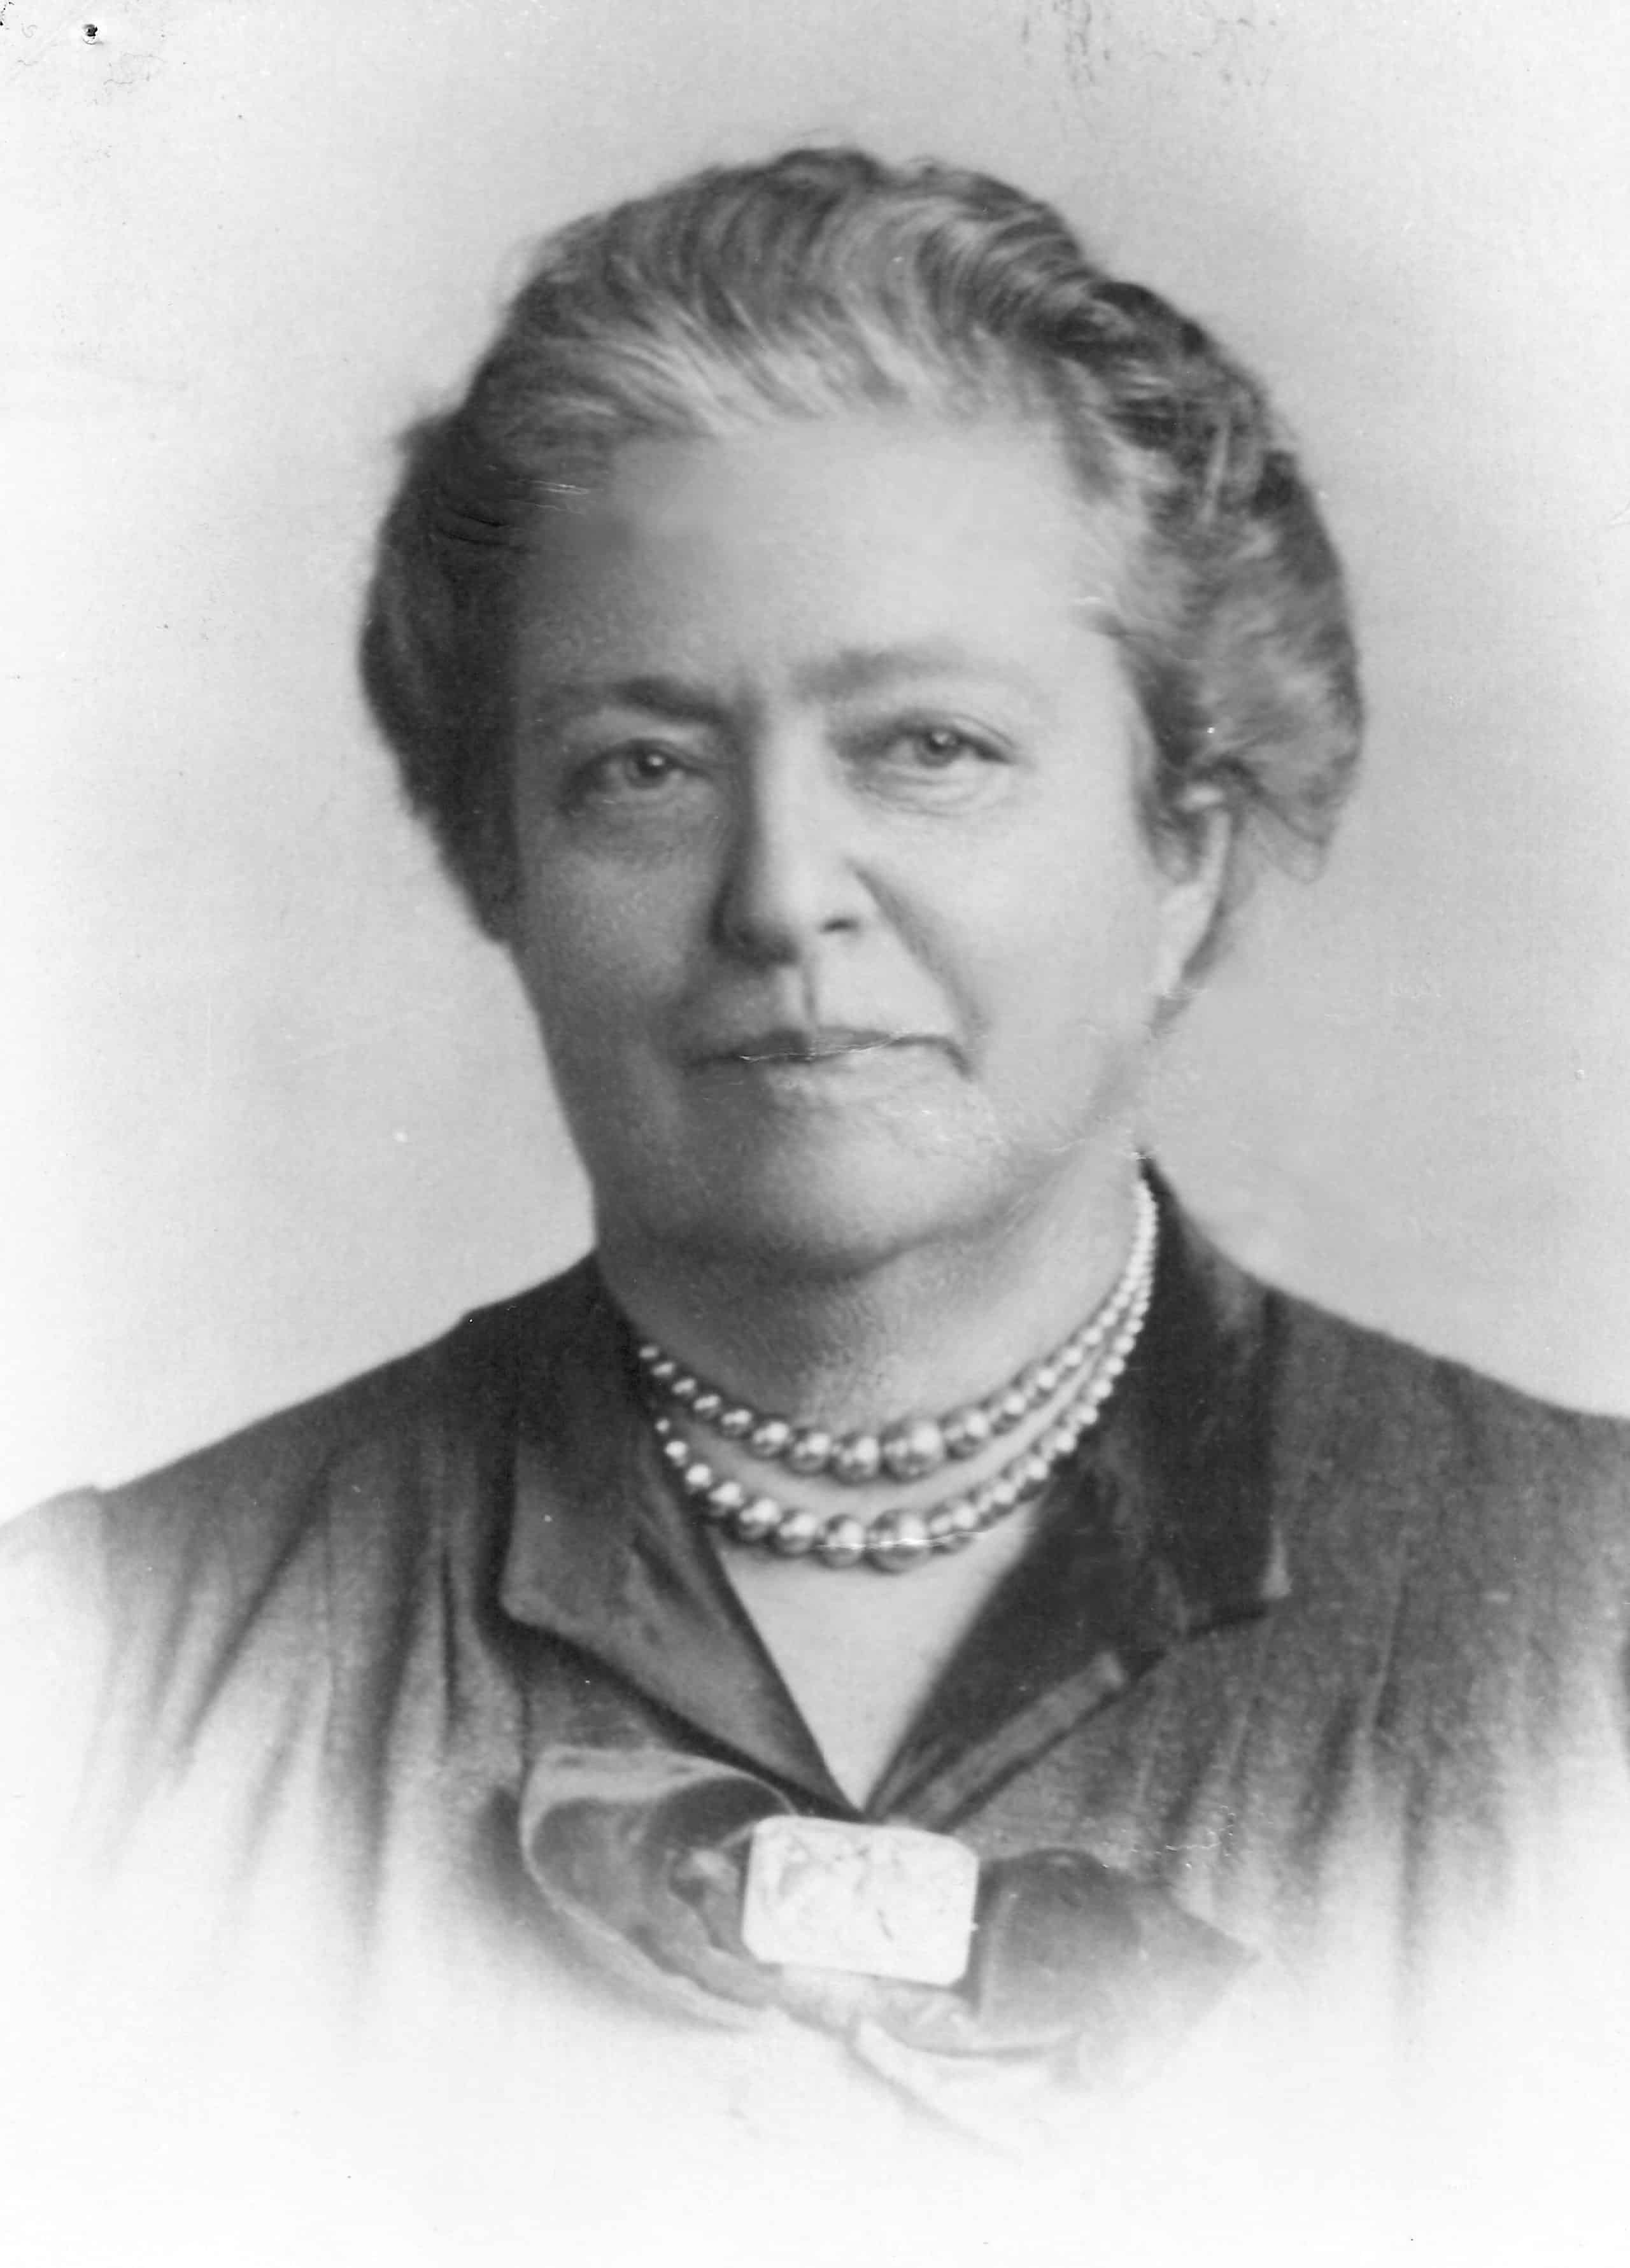 Archive photo of Agnes Etherington, with necklace